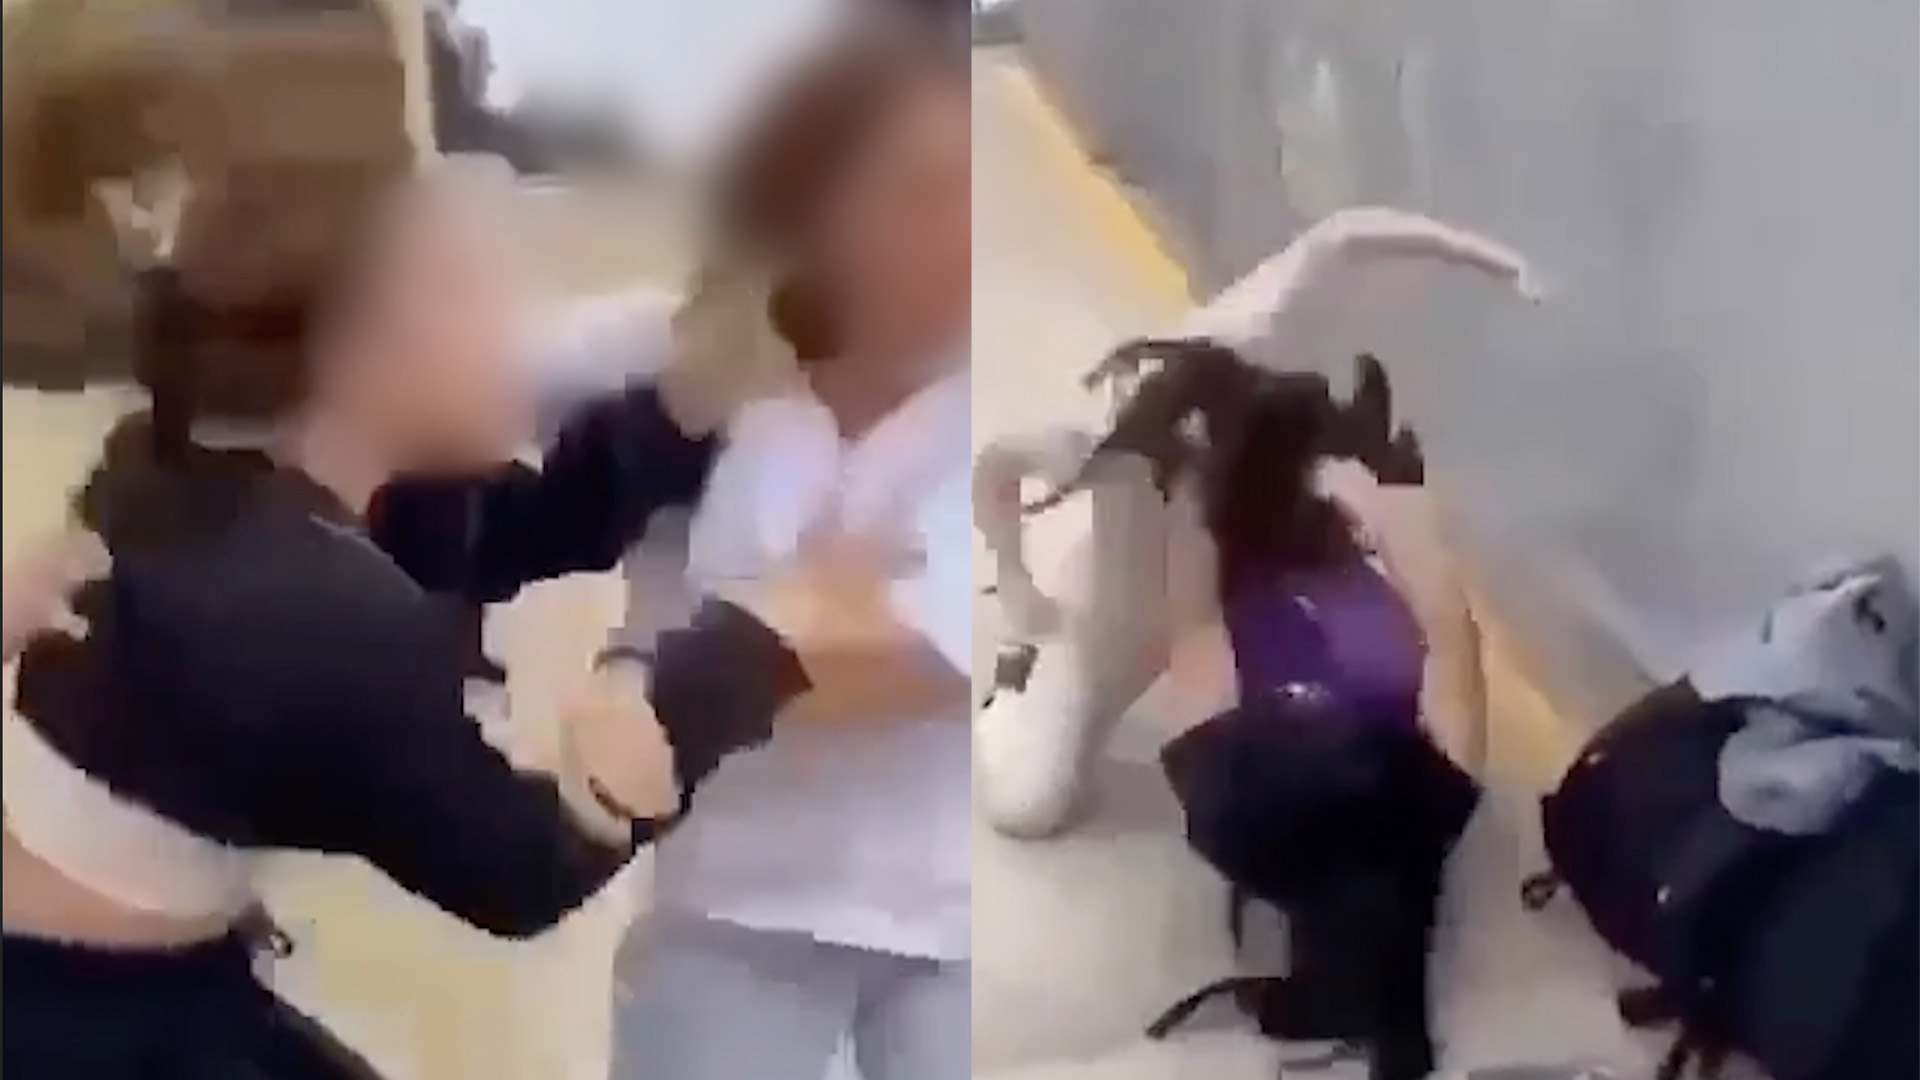 Four Teens Come To Blows as More Fight Footage Emerges